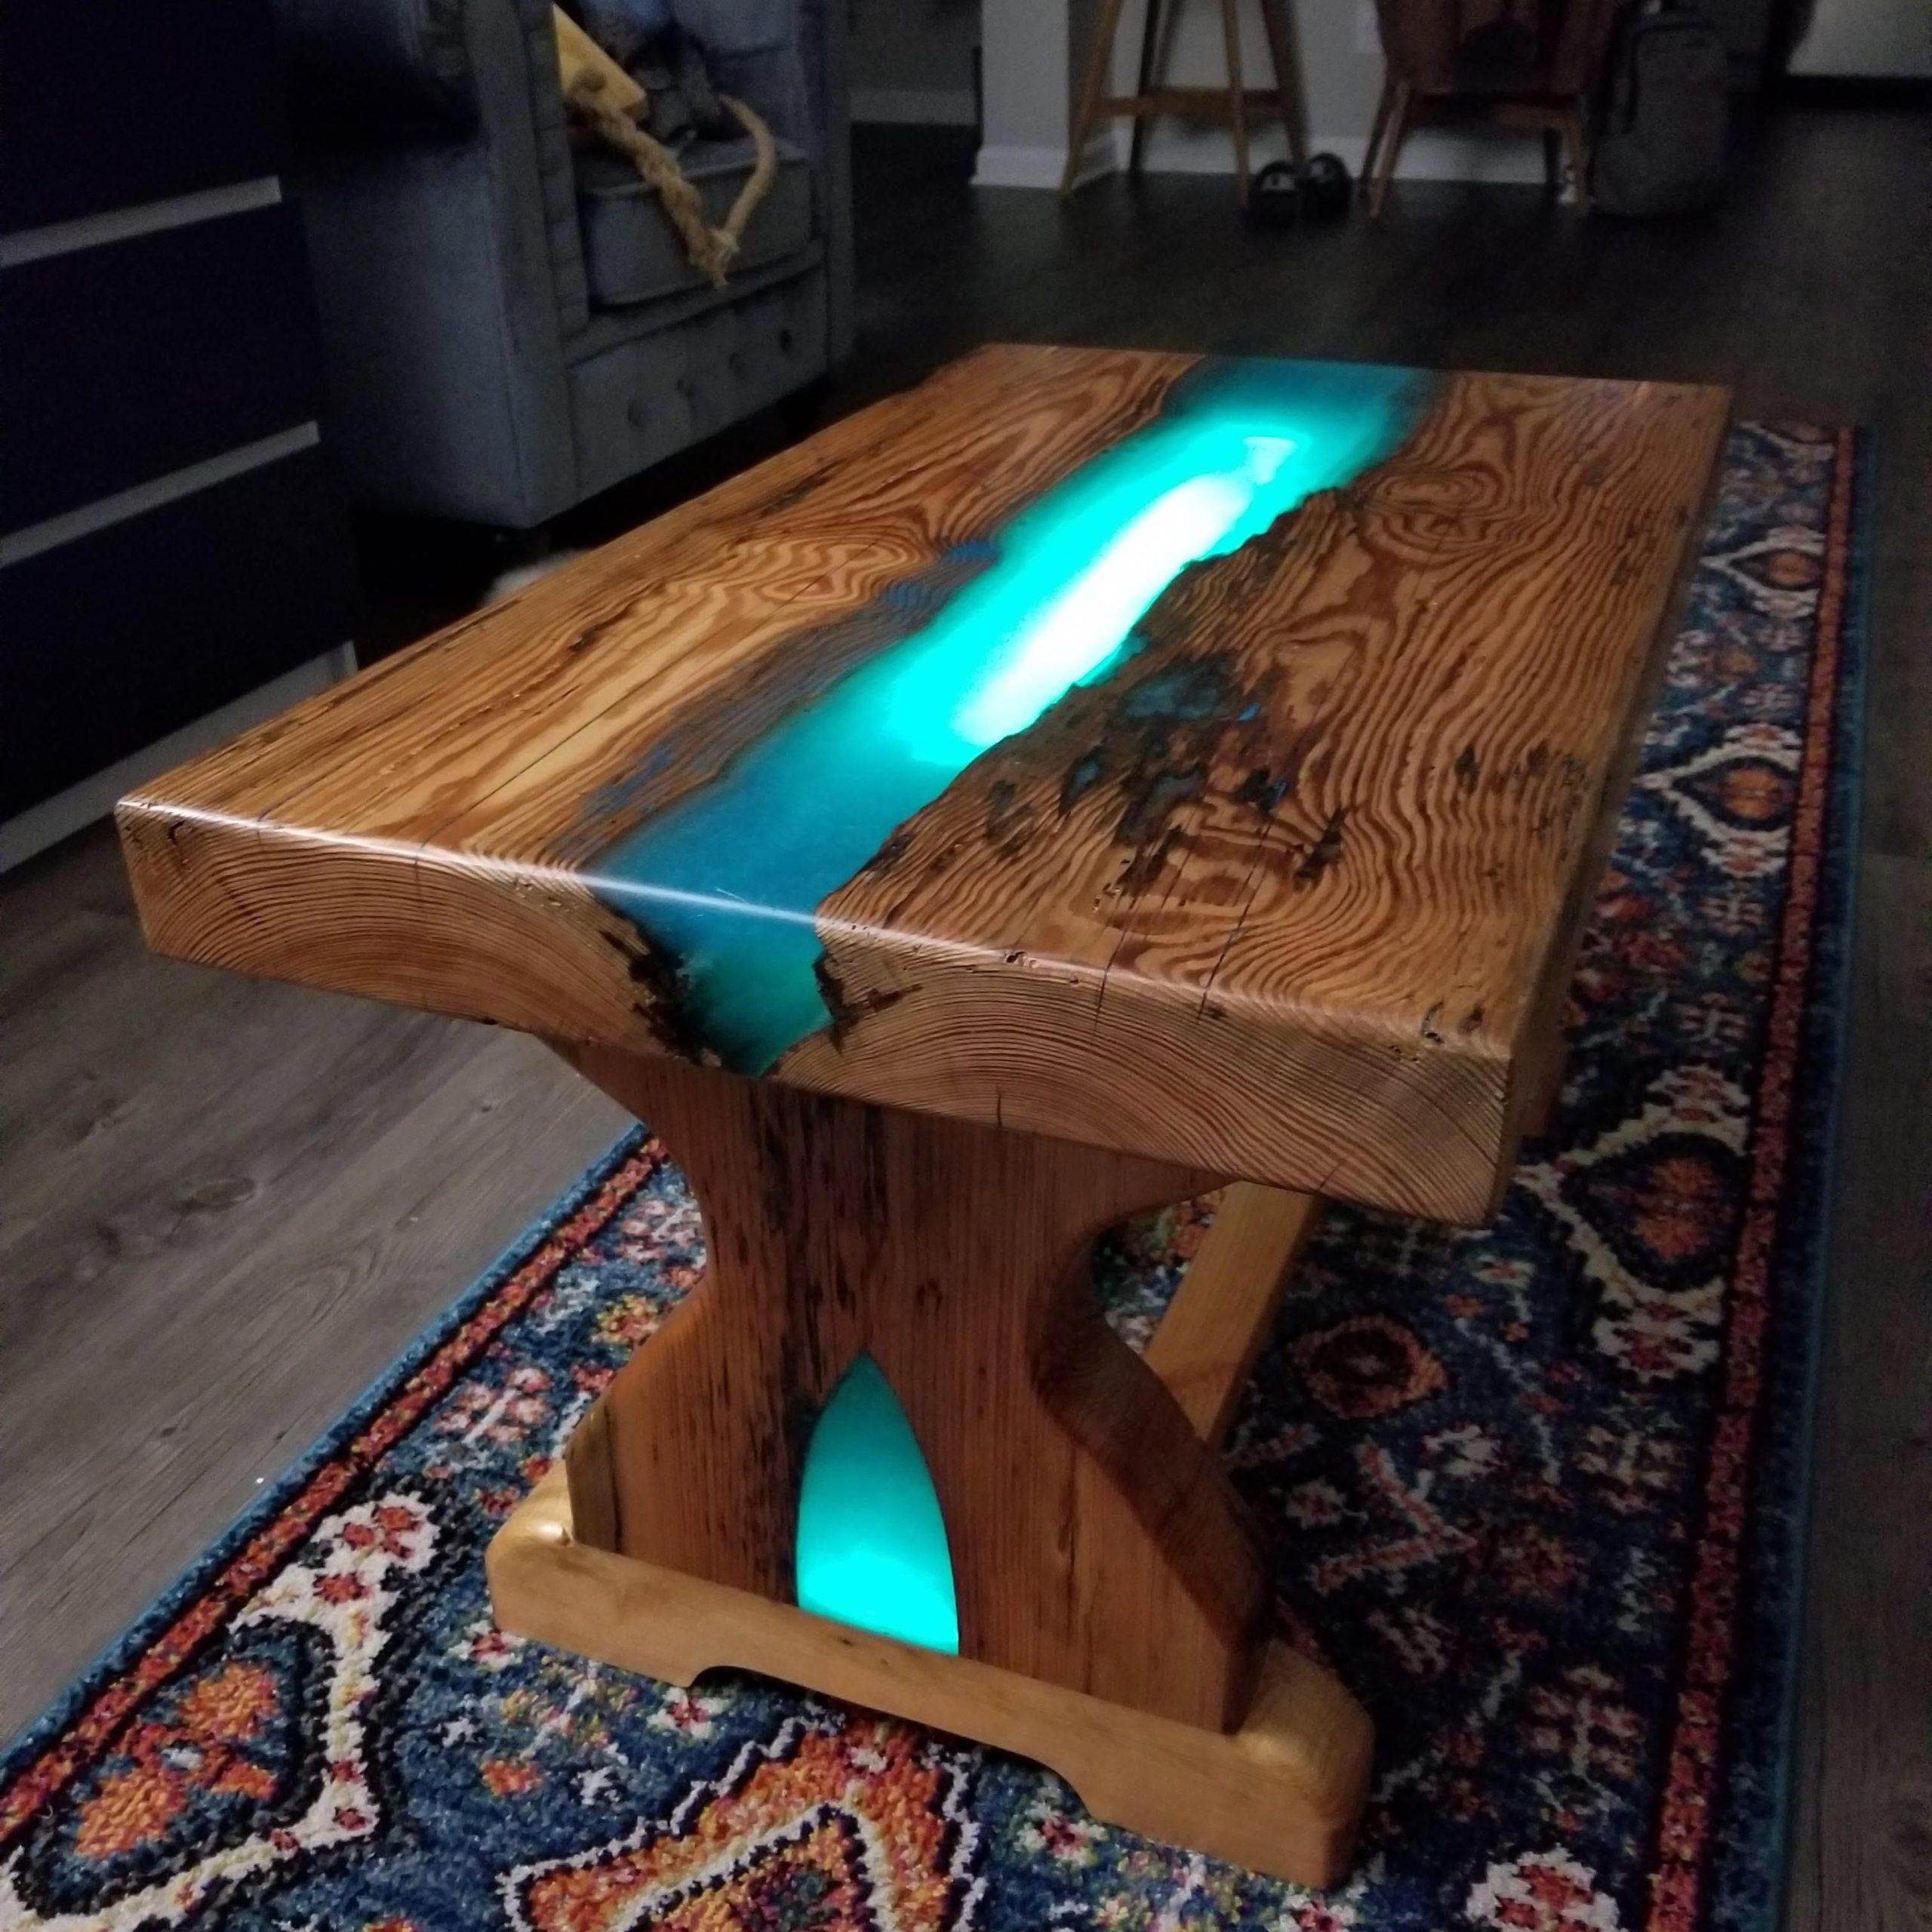 This Led Lit Coffee Table My Girlfriend's Dad Built For Us # For Coffee Tables With Led Lights (Gallery 13 of 20)